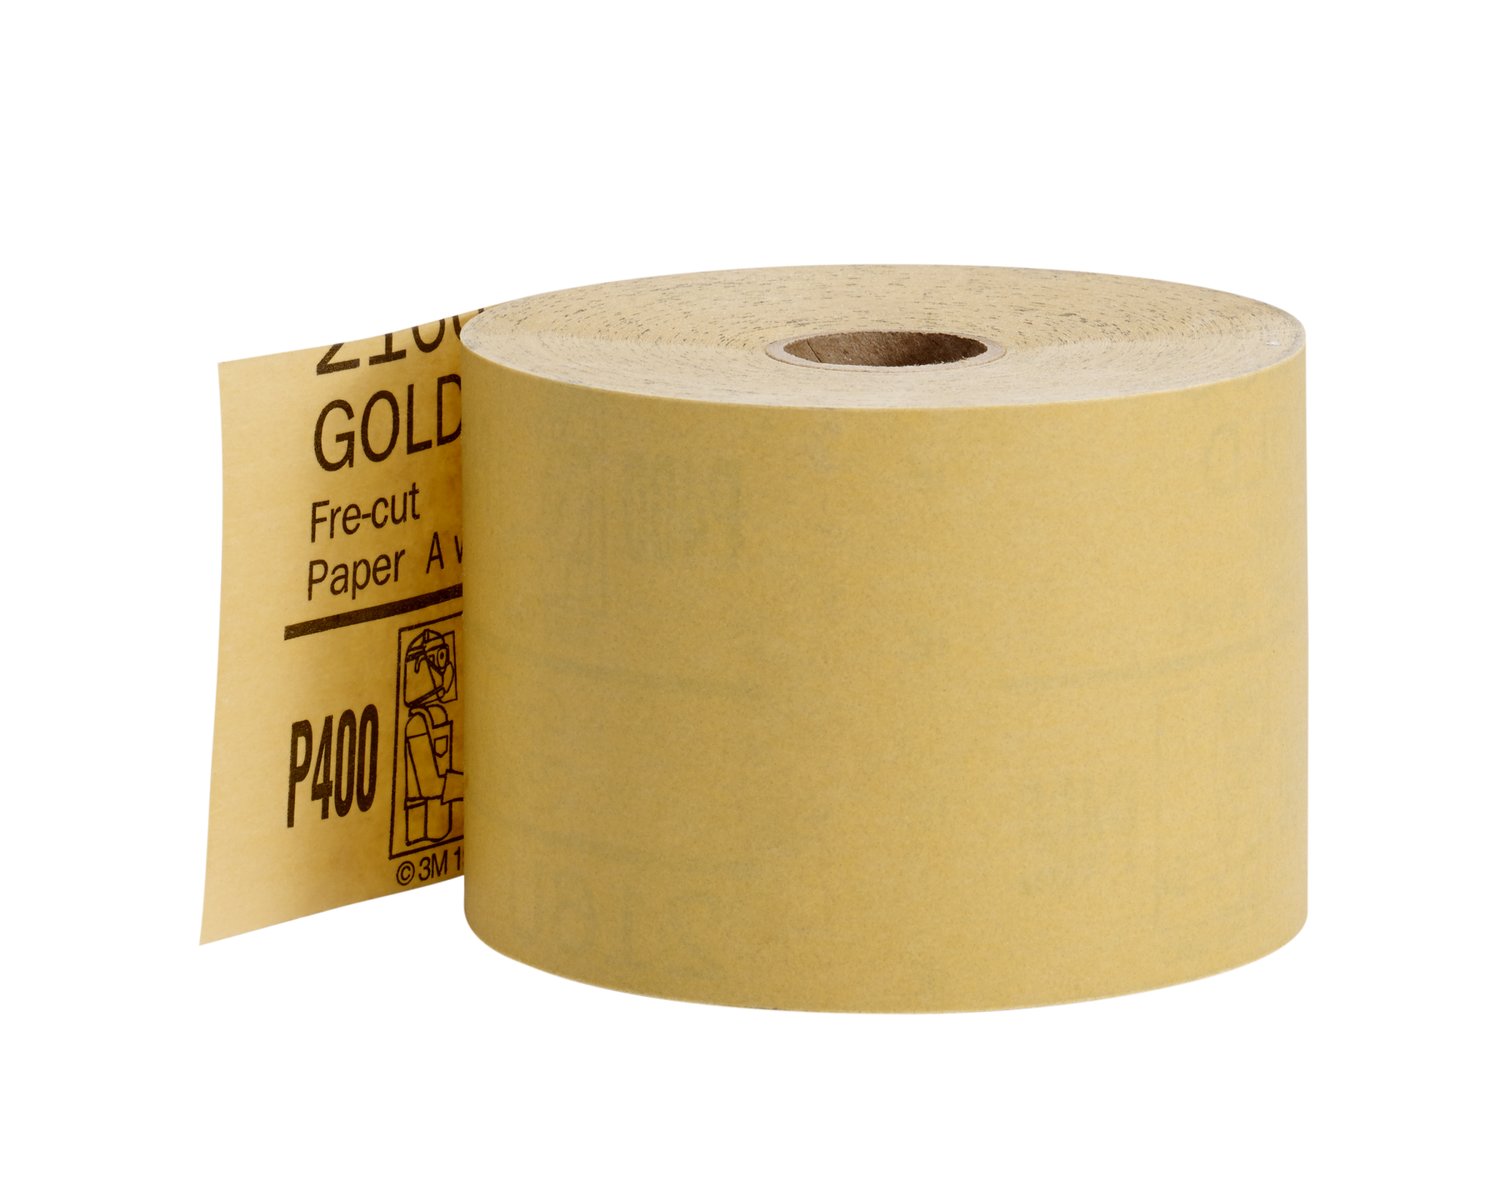 7010532826 - 3M Stikit Paper Roll 236U, P320 C-weight, 2-3/4 in x 50 yd, ASO,
Full-flex, Continuous Length - Spliced